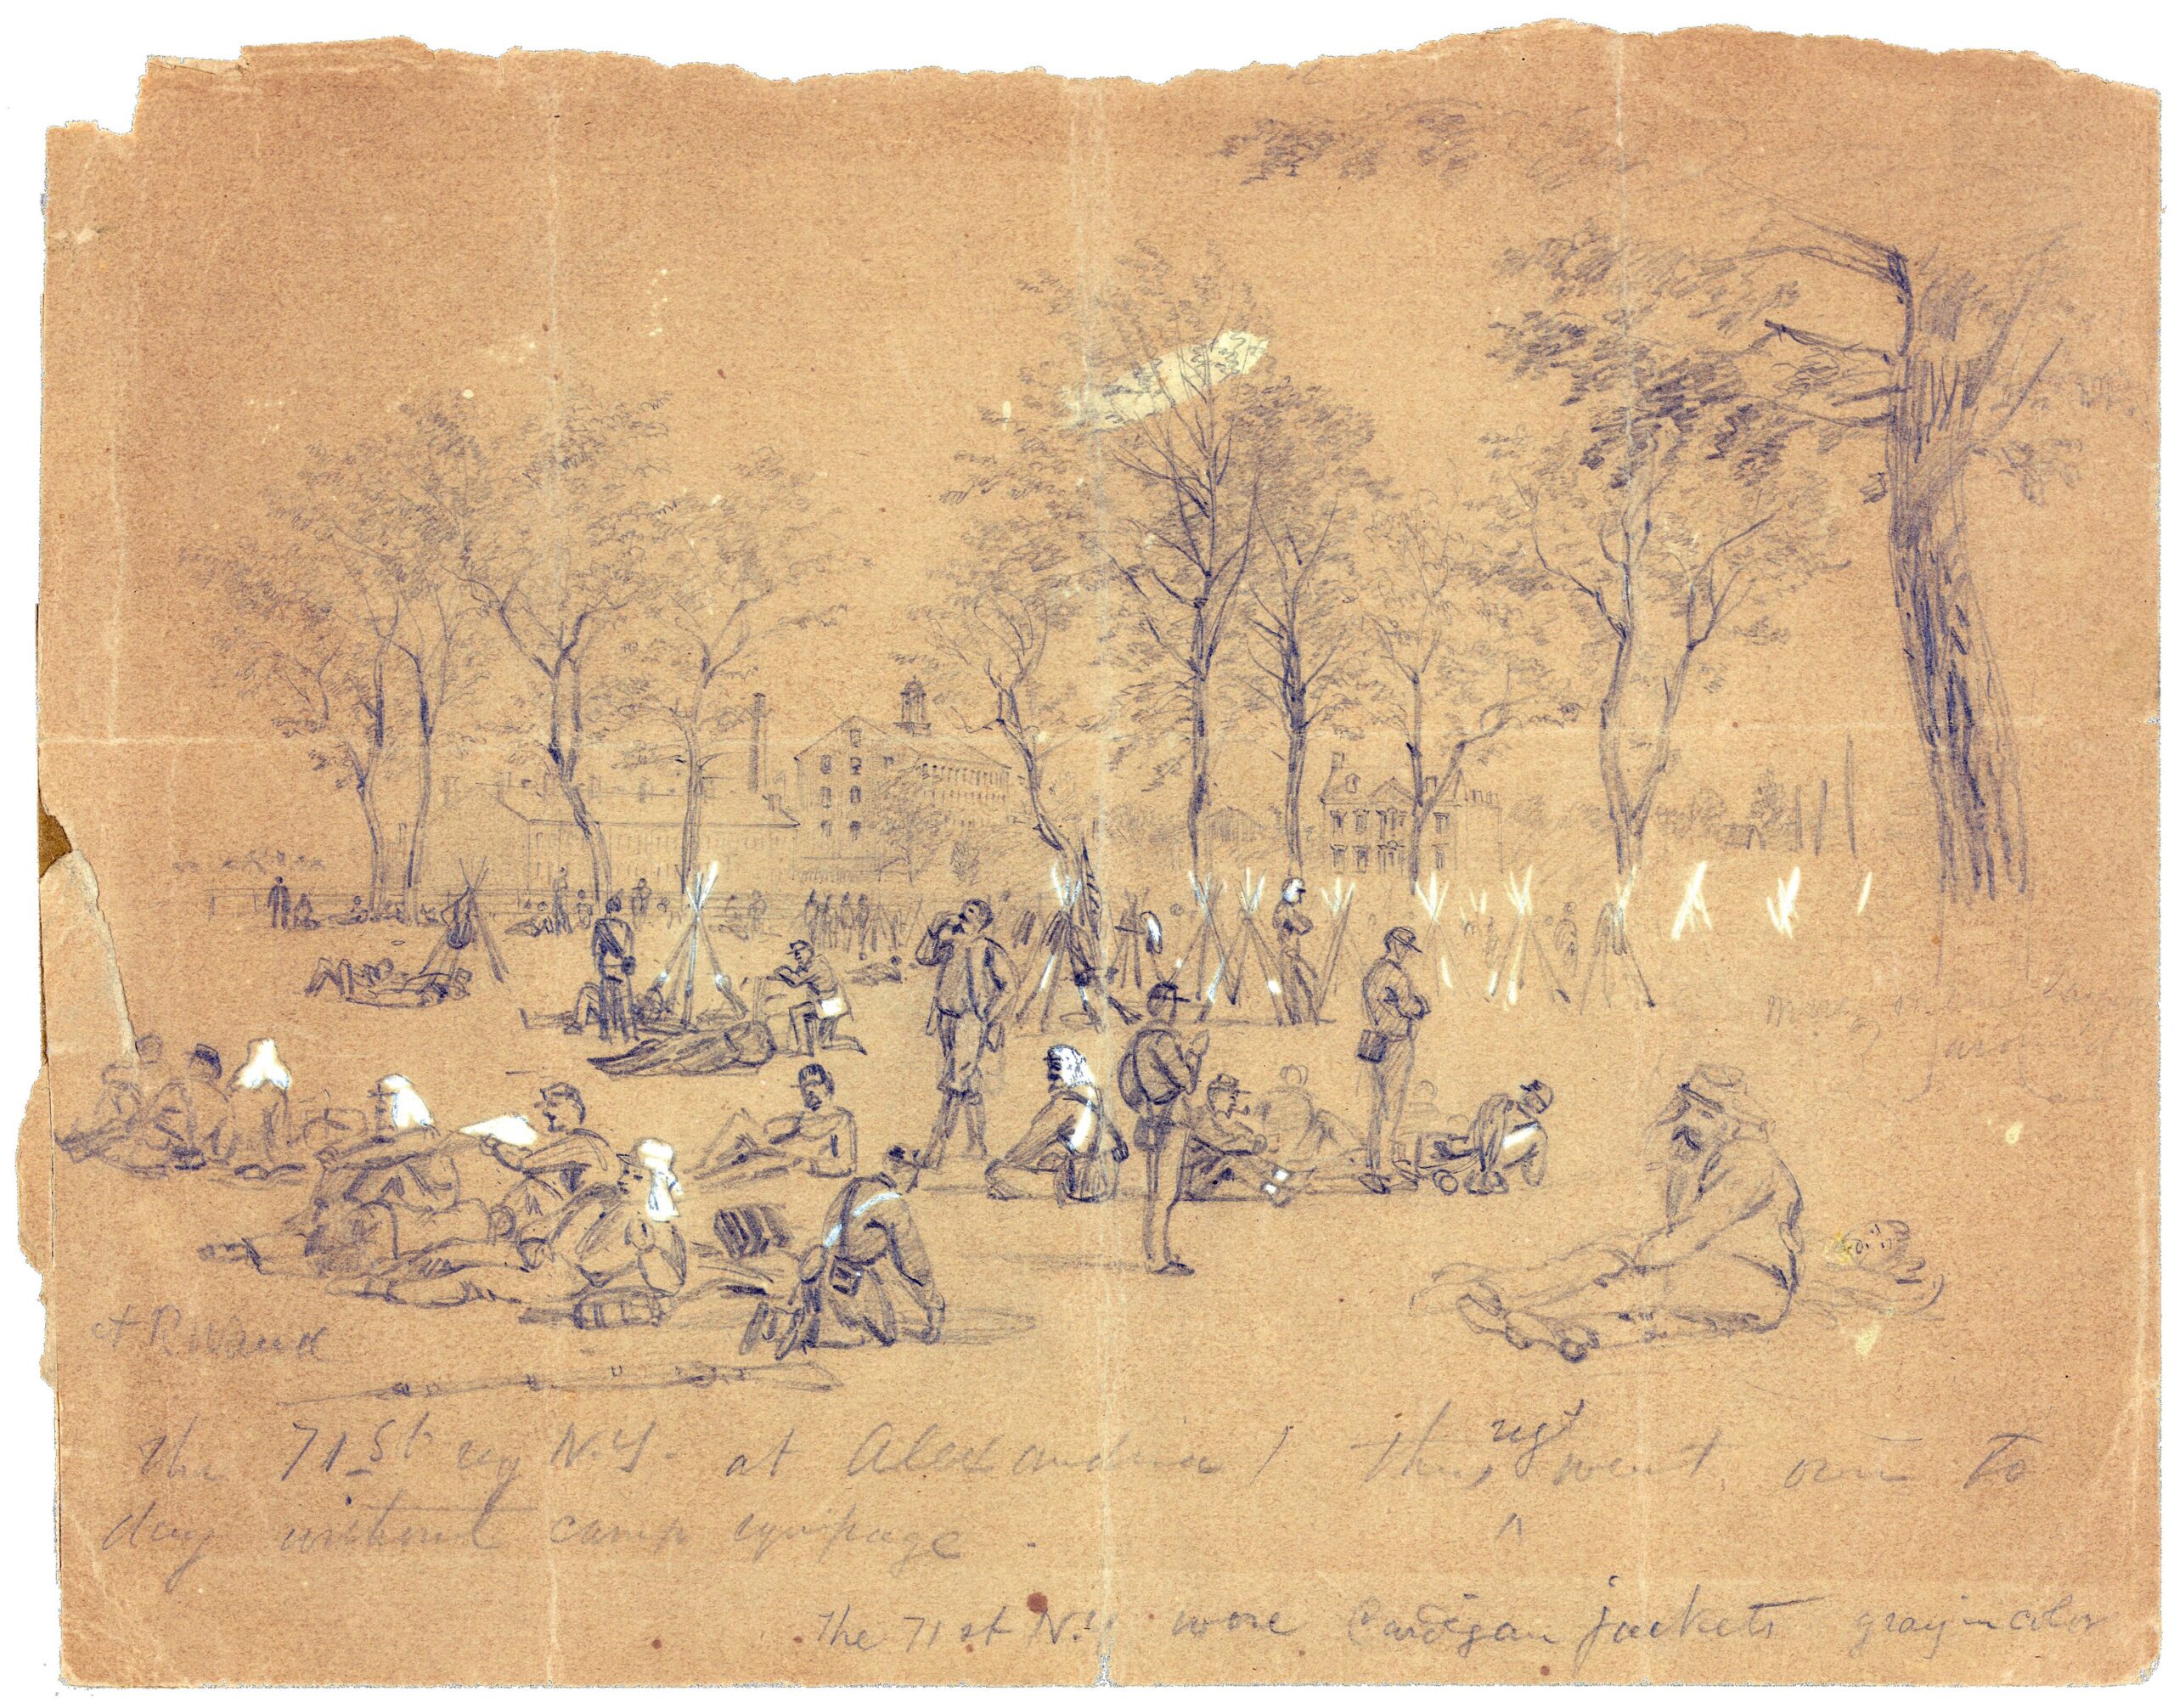 The 71st reg. N.Y. at Alexandria, late May 1861, sketch by Alfred R Waud